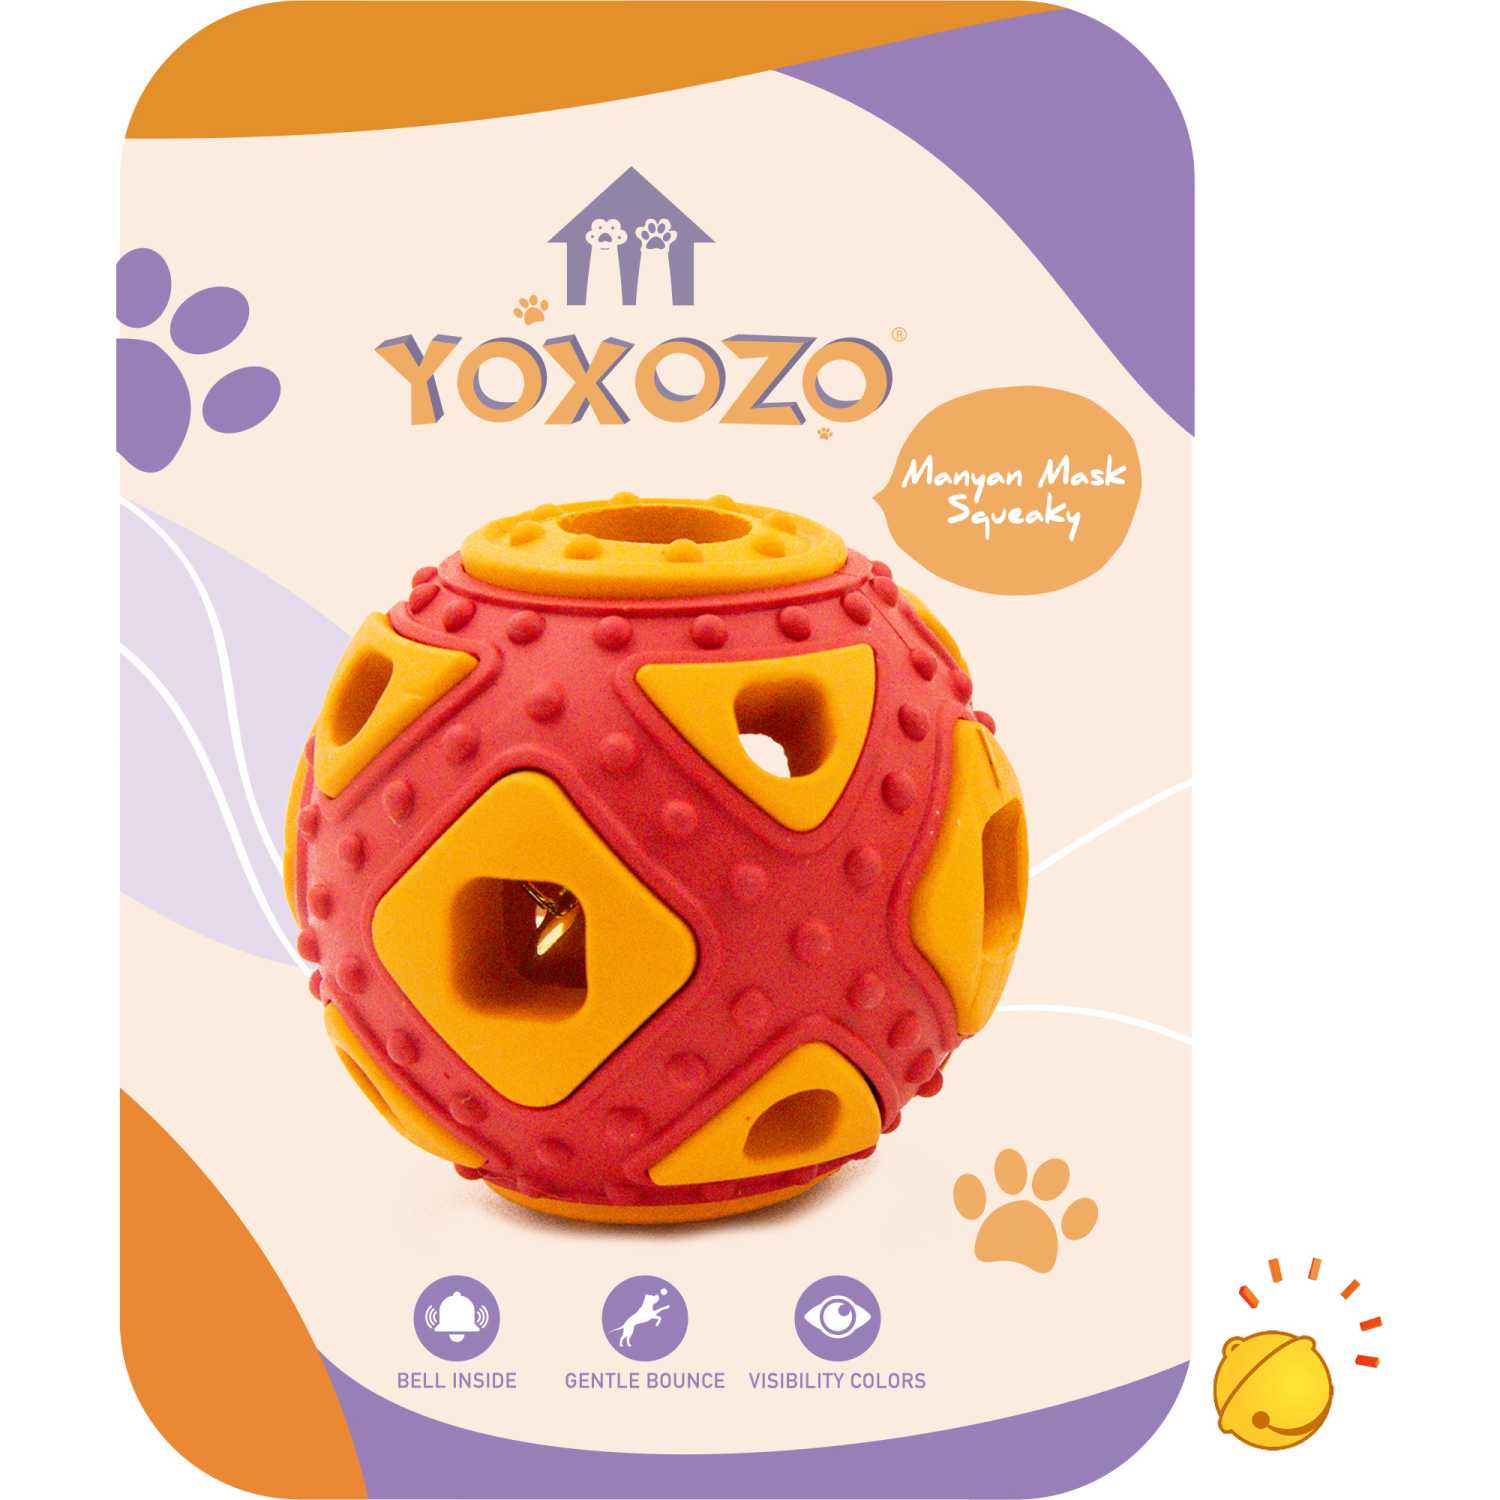 Dog Ball Toy, Jingle Bell Inside for Gift, Rubber Squeaky Toy, Interactive Smart Ball with Holes, Ideal for Puppies, Small, Medium and Blind Dogs, 2.5 Inch (RED Orange)